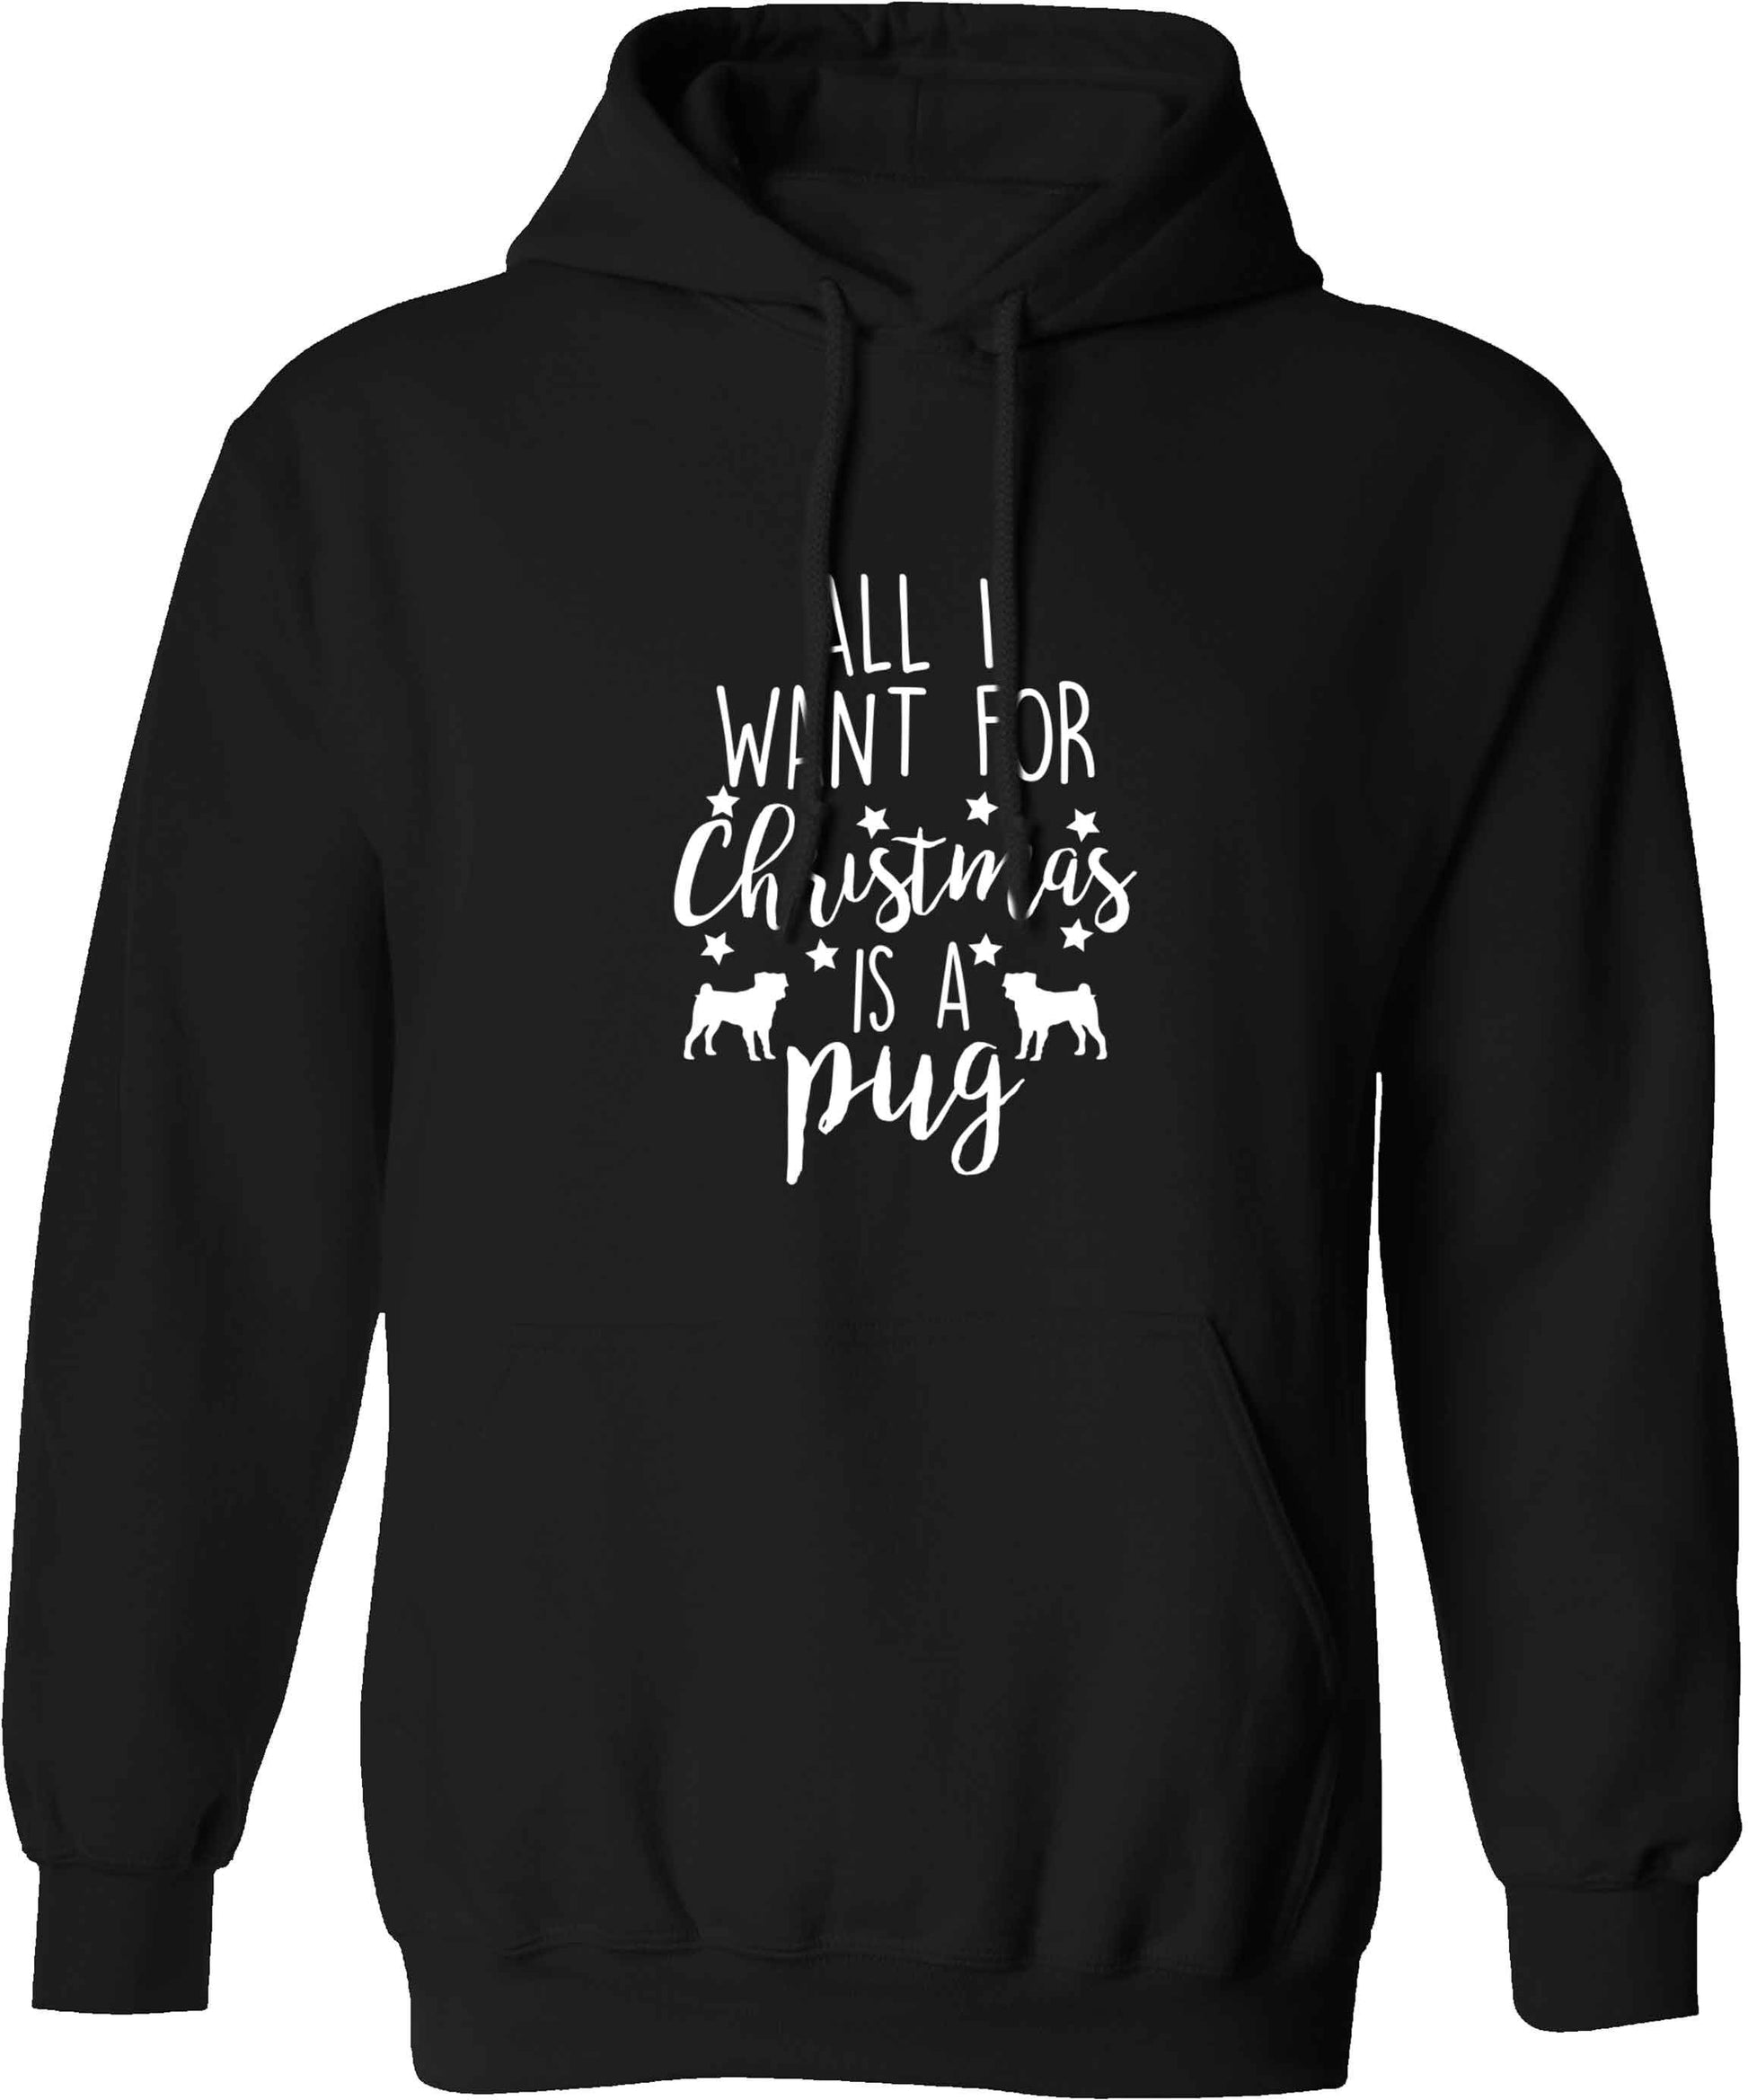 All I want for Christmas is a pug adults unisex black hoodie 2XL